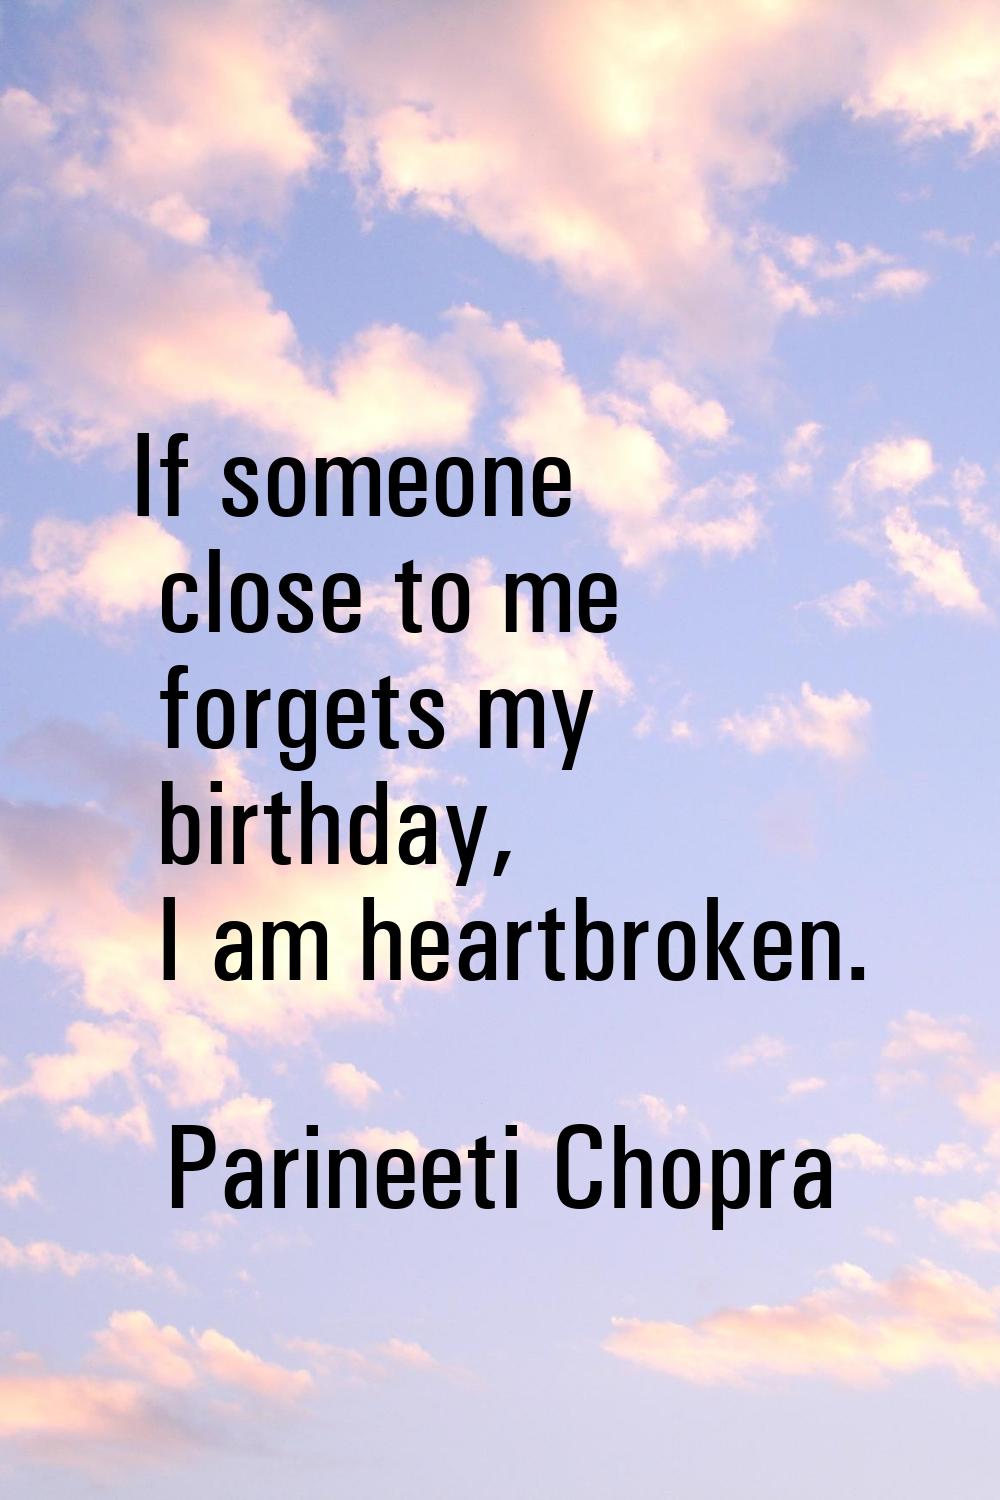 If someone close to me forgets my birthday, I am heartbroken.